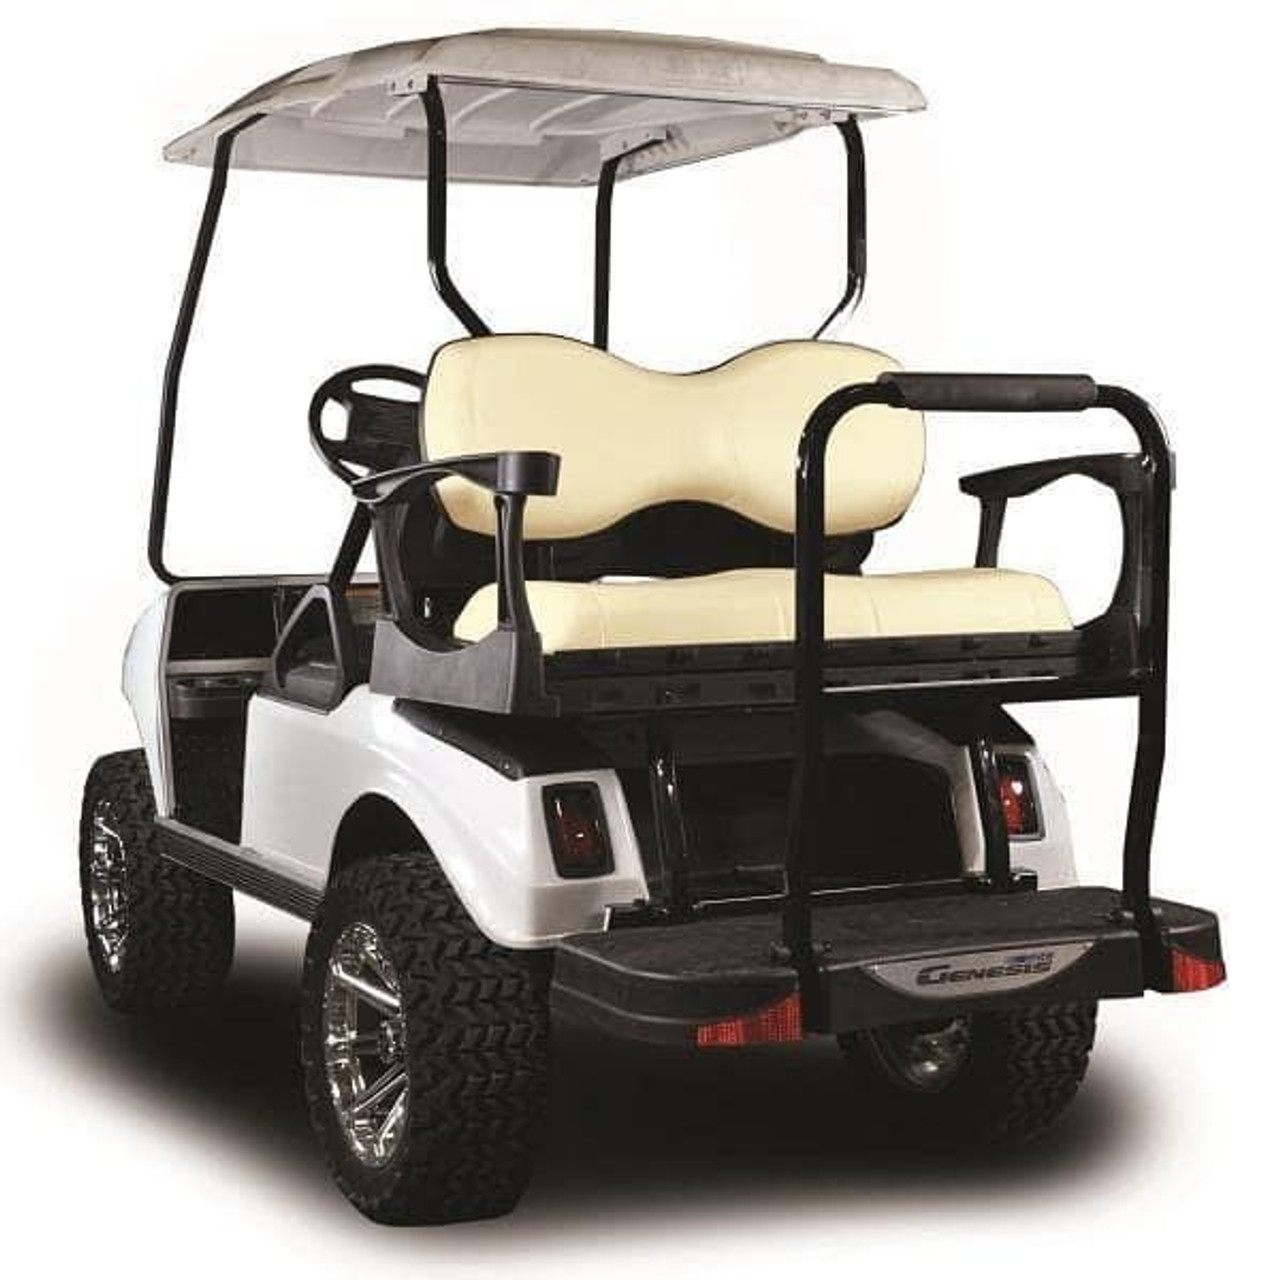 Madjax Genesis 300 Alum. Rear Seat with Deluxe Black Cushions -Club Car Precedent 2004-UpTHE Golf Cart is Not Included